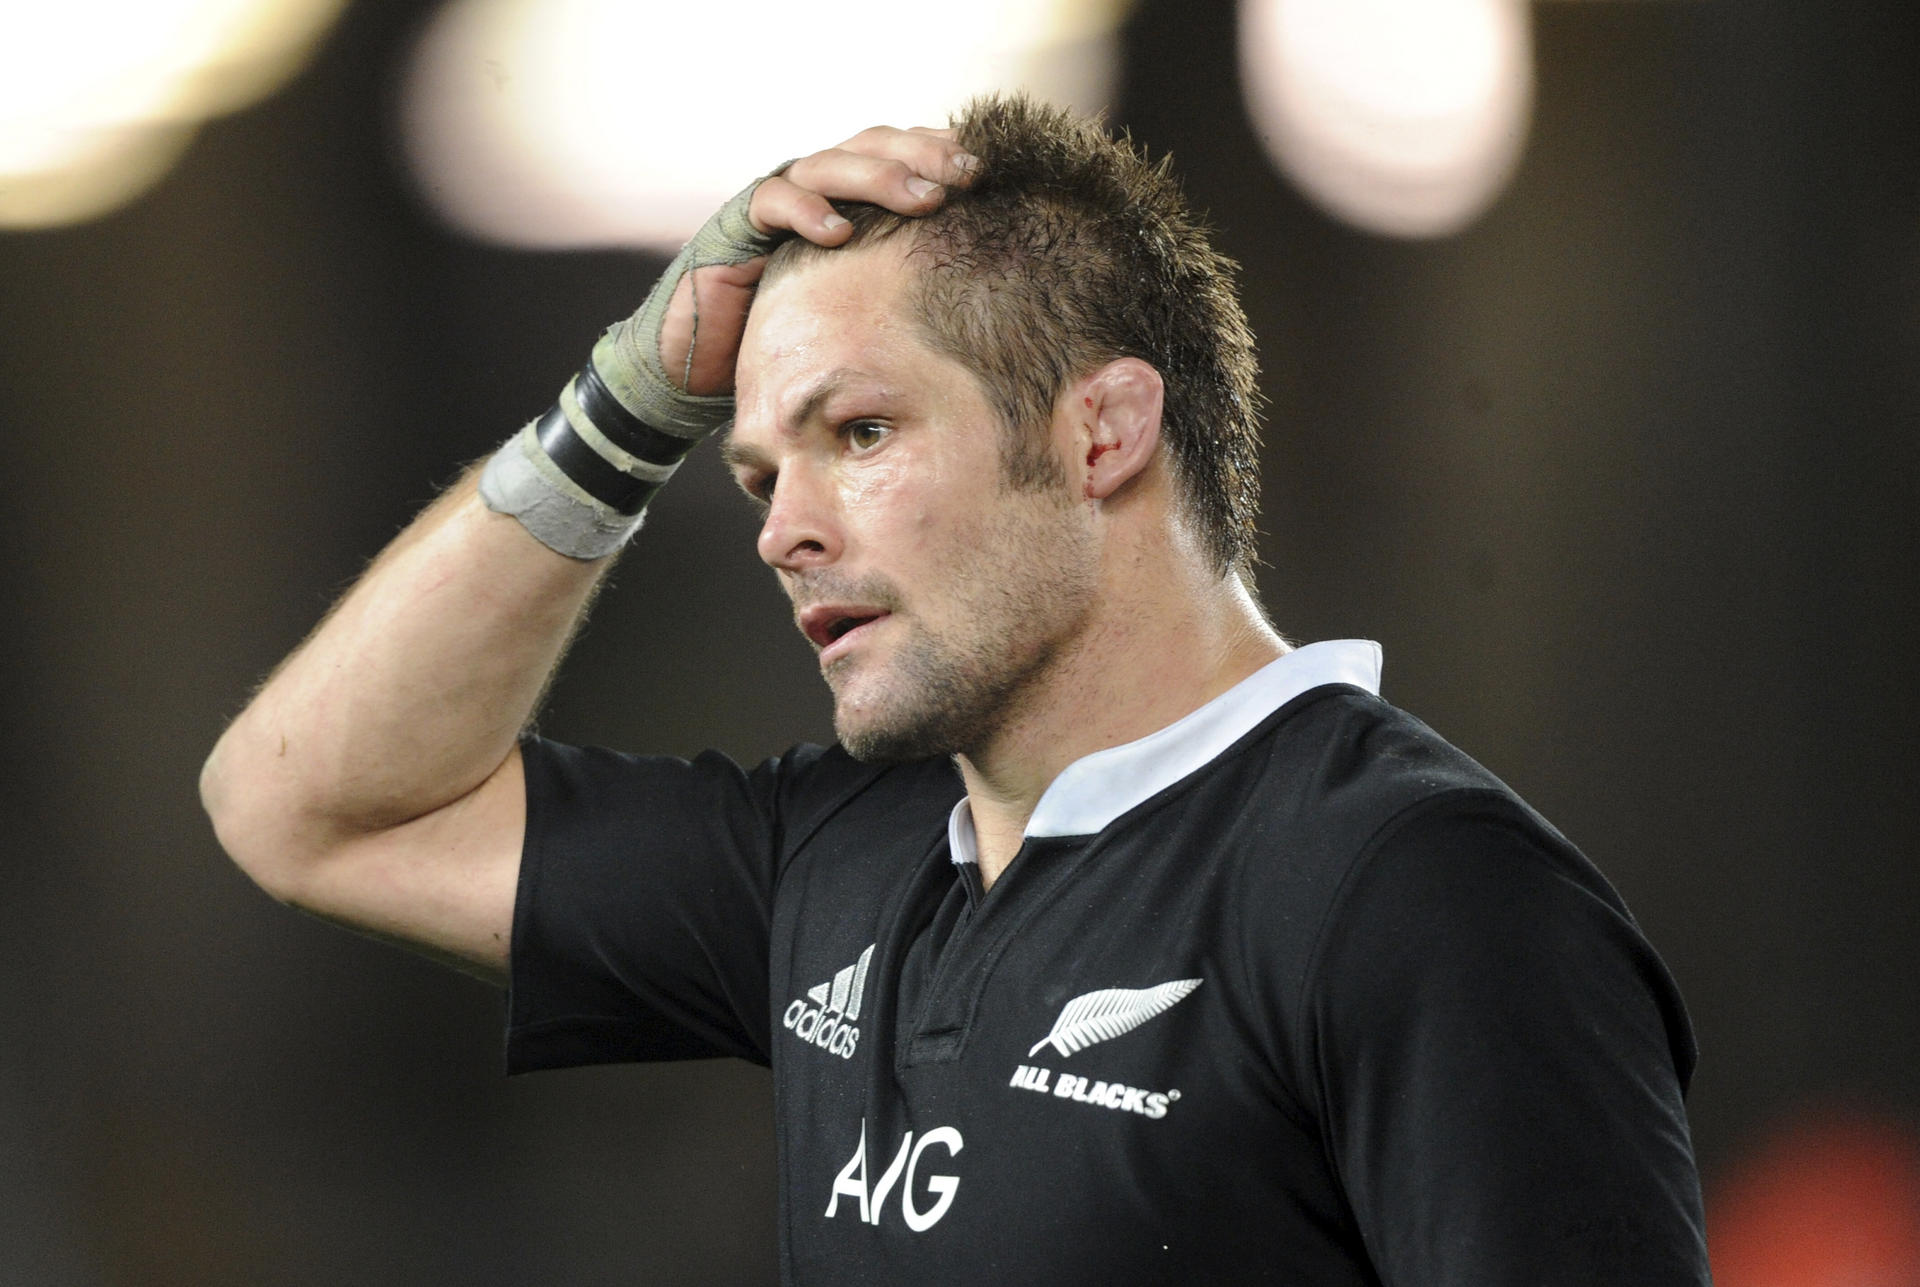 All Blacks captain Richie McCaw has had a difficult season and came into the England series under scrutiny after a broken thumb ruled him out of much of the Crusaders' early Super 15 campaign. Photo: AP